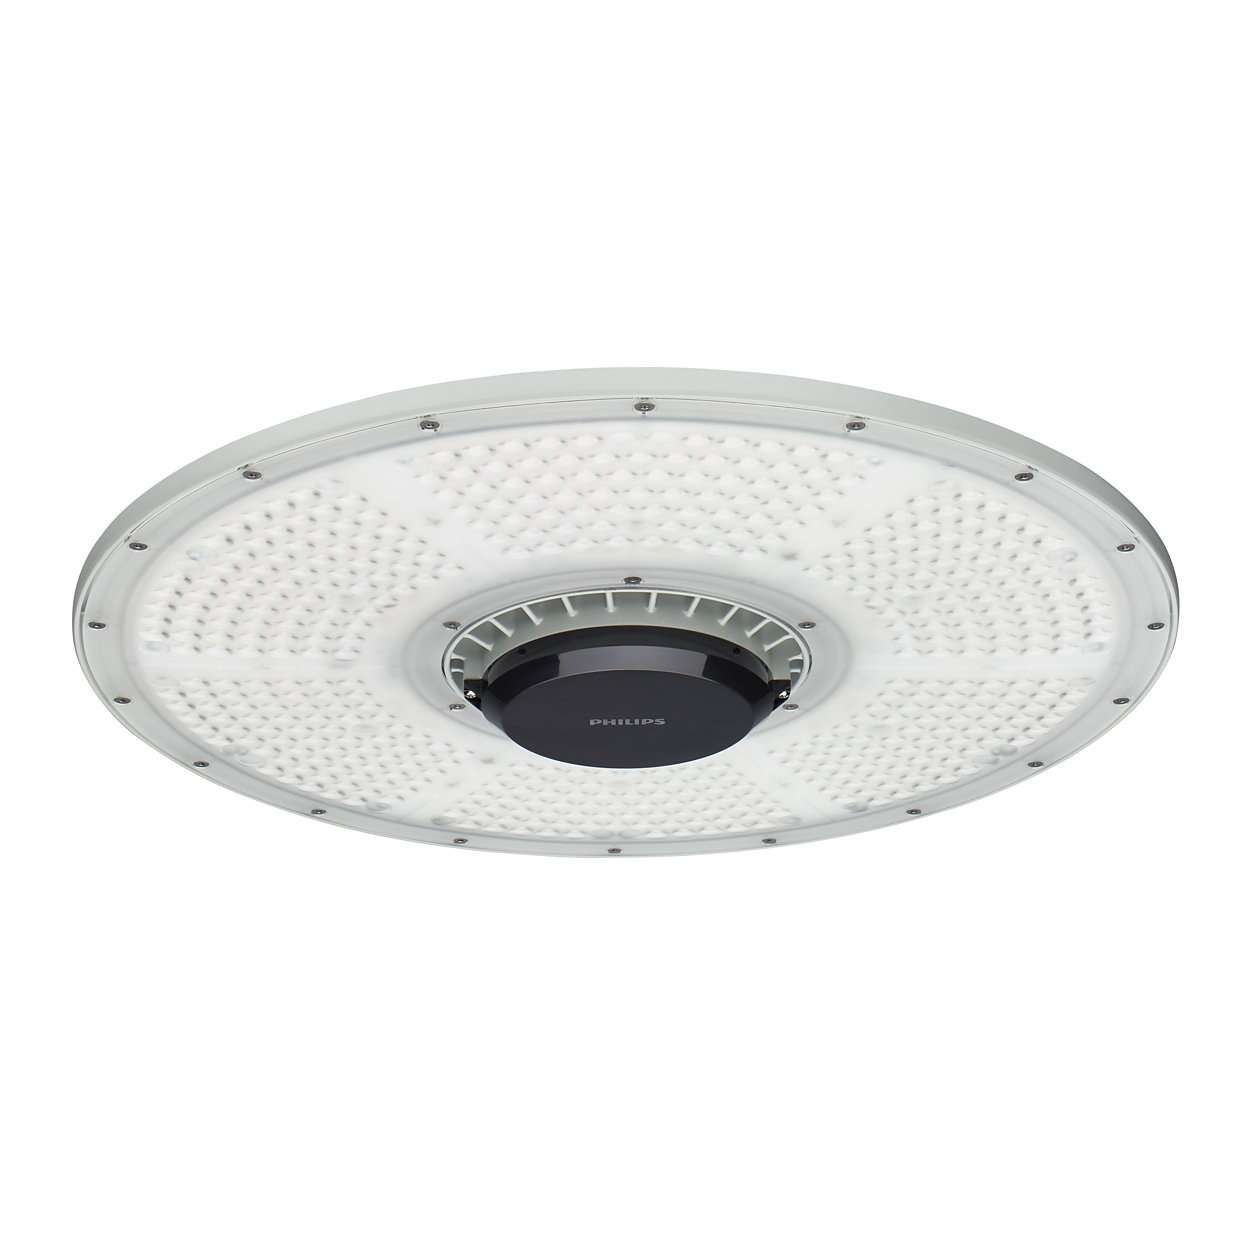 A superior light quality, highly efficient and reliable solution.